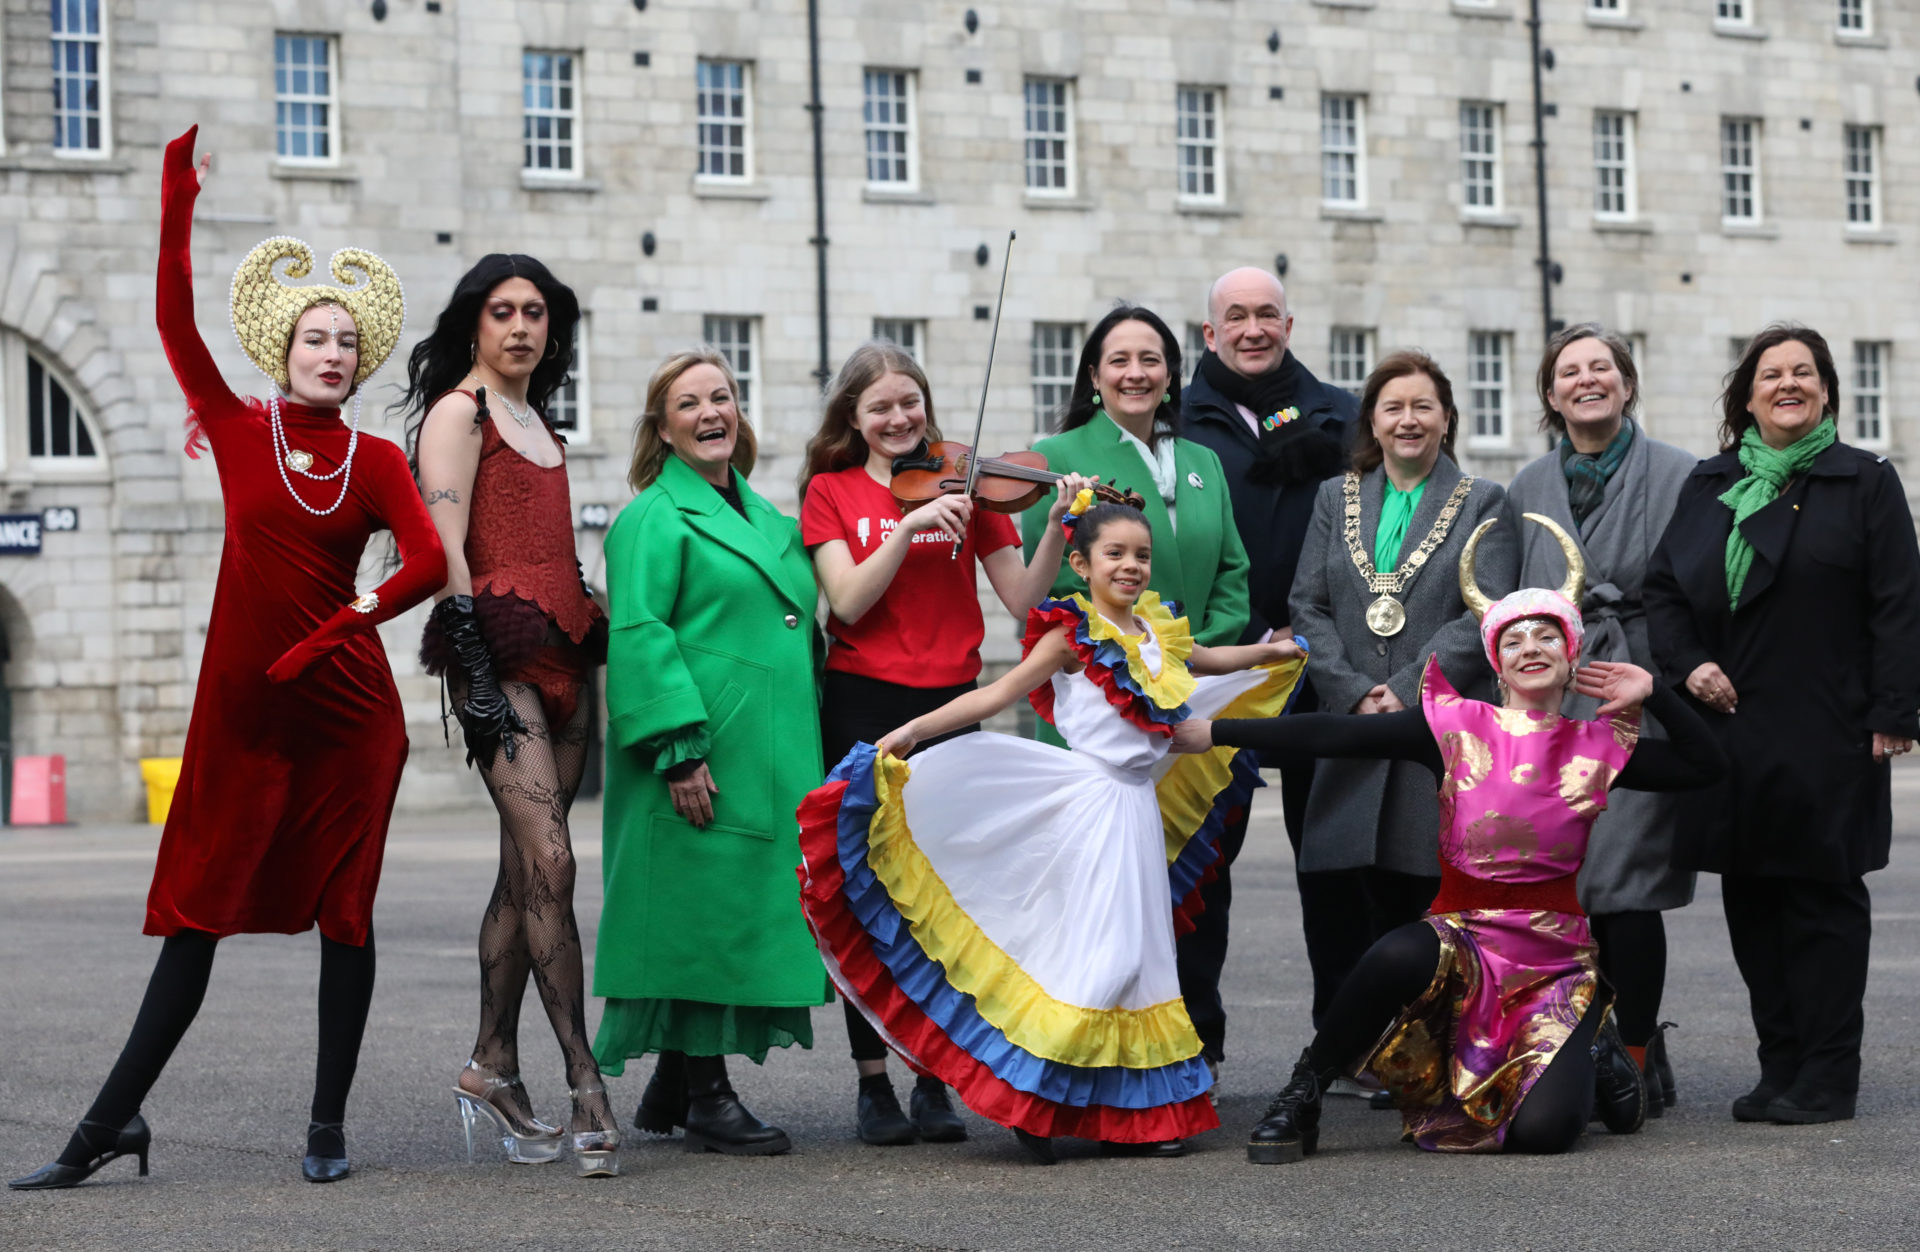  Dublin Lord Mayor Caroline Conroy and Minister for Culture Catherine Martin with artisits at the National Museum Collins Barracks for the launch of the St Patrick's Day Festival